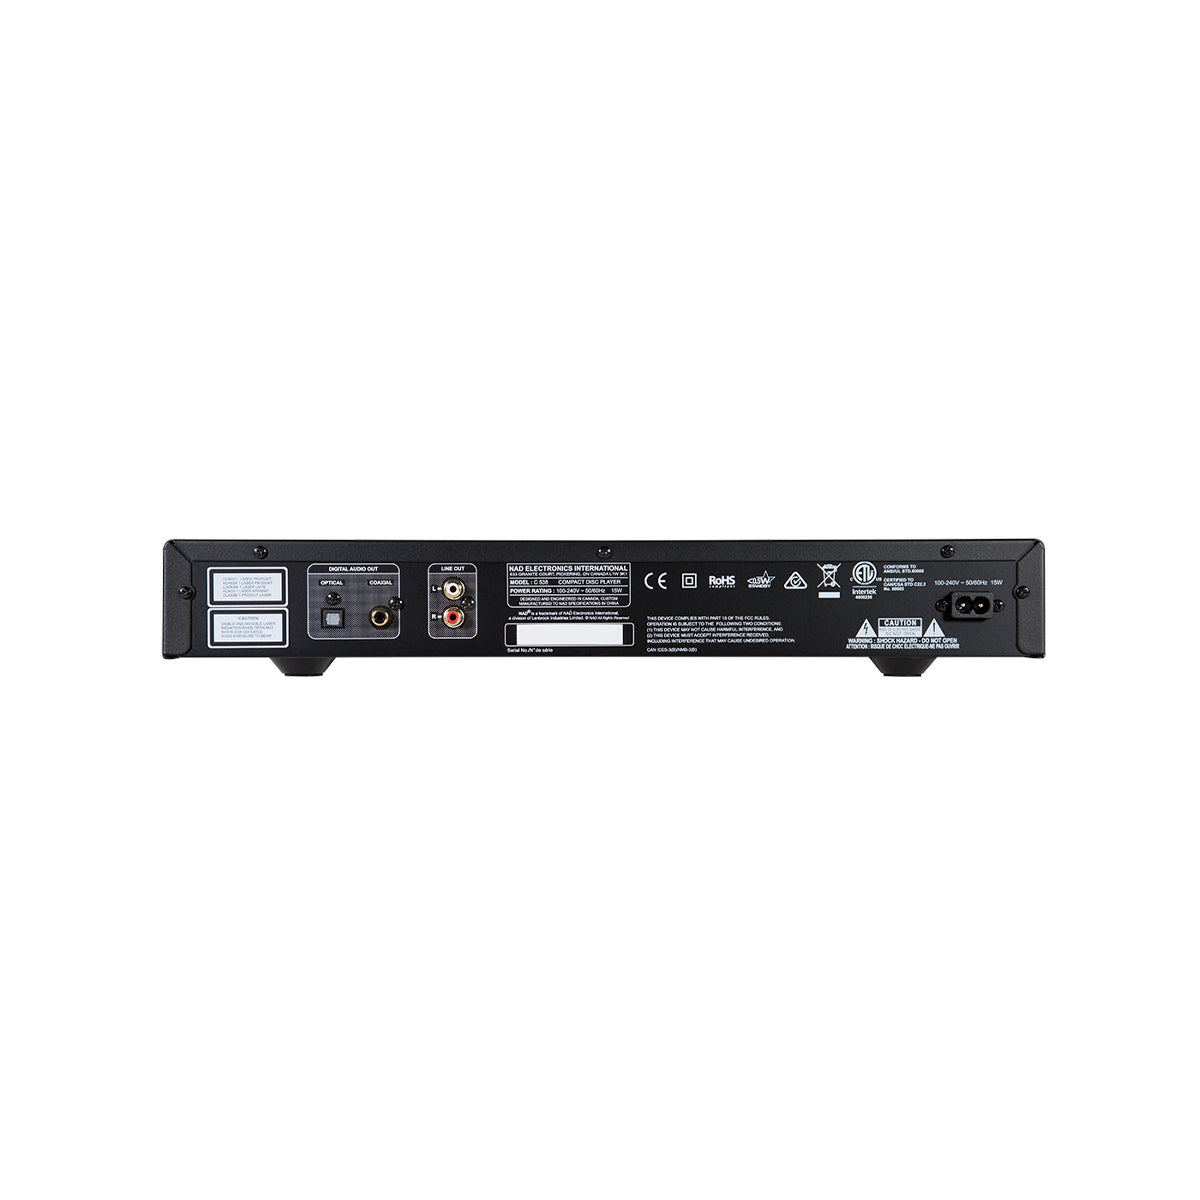 NAD C538 CD Player - The Audio Experts